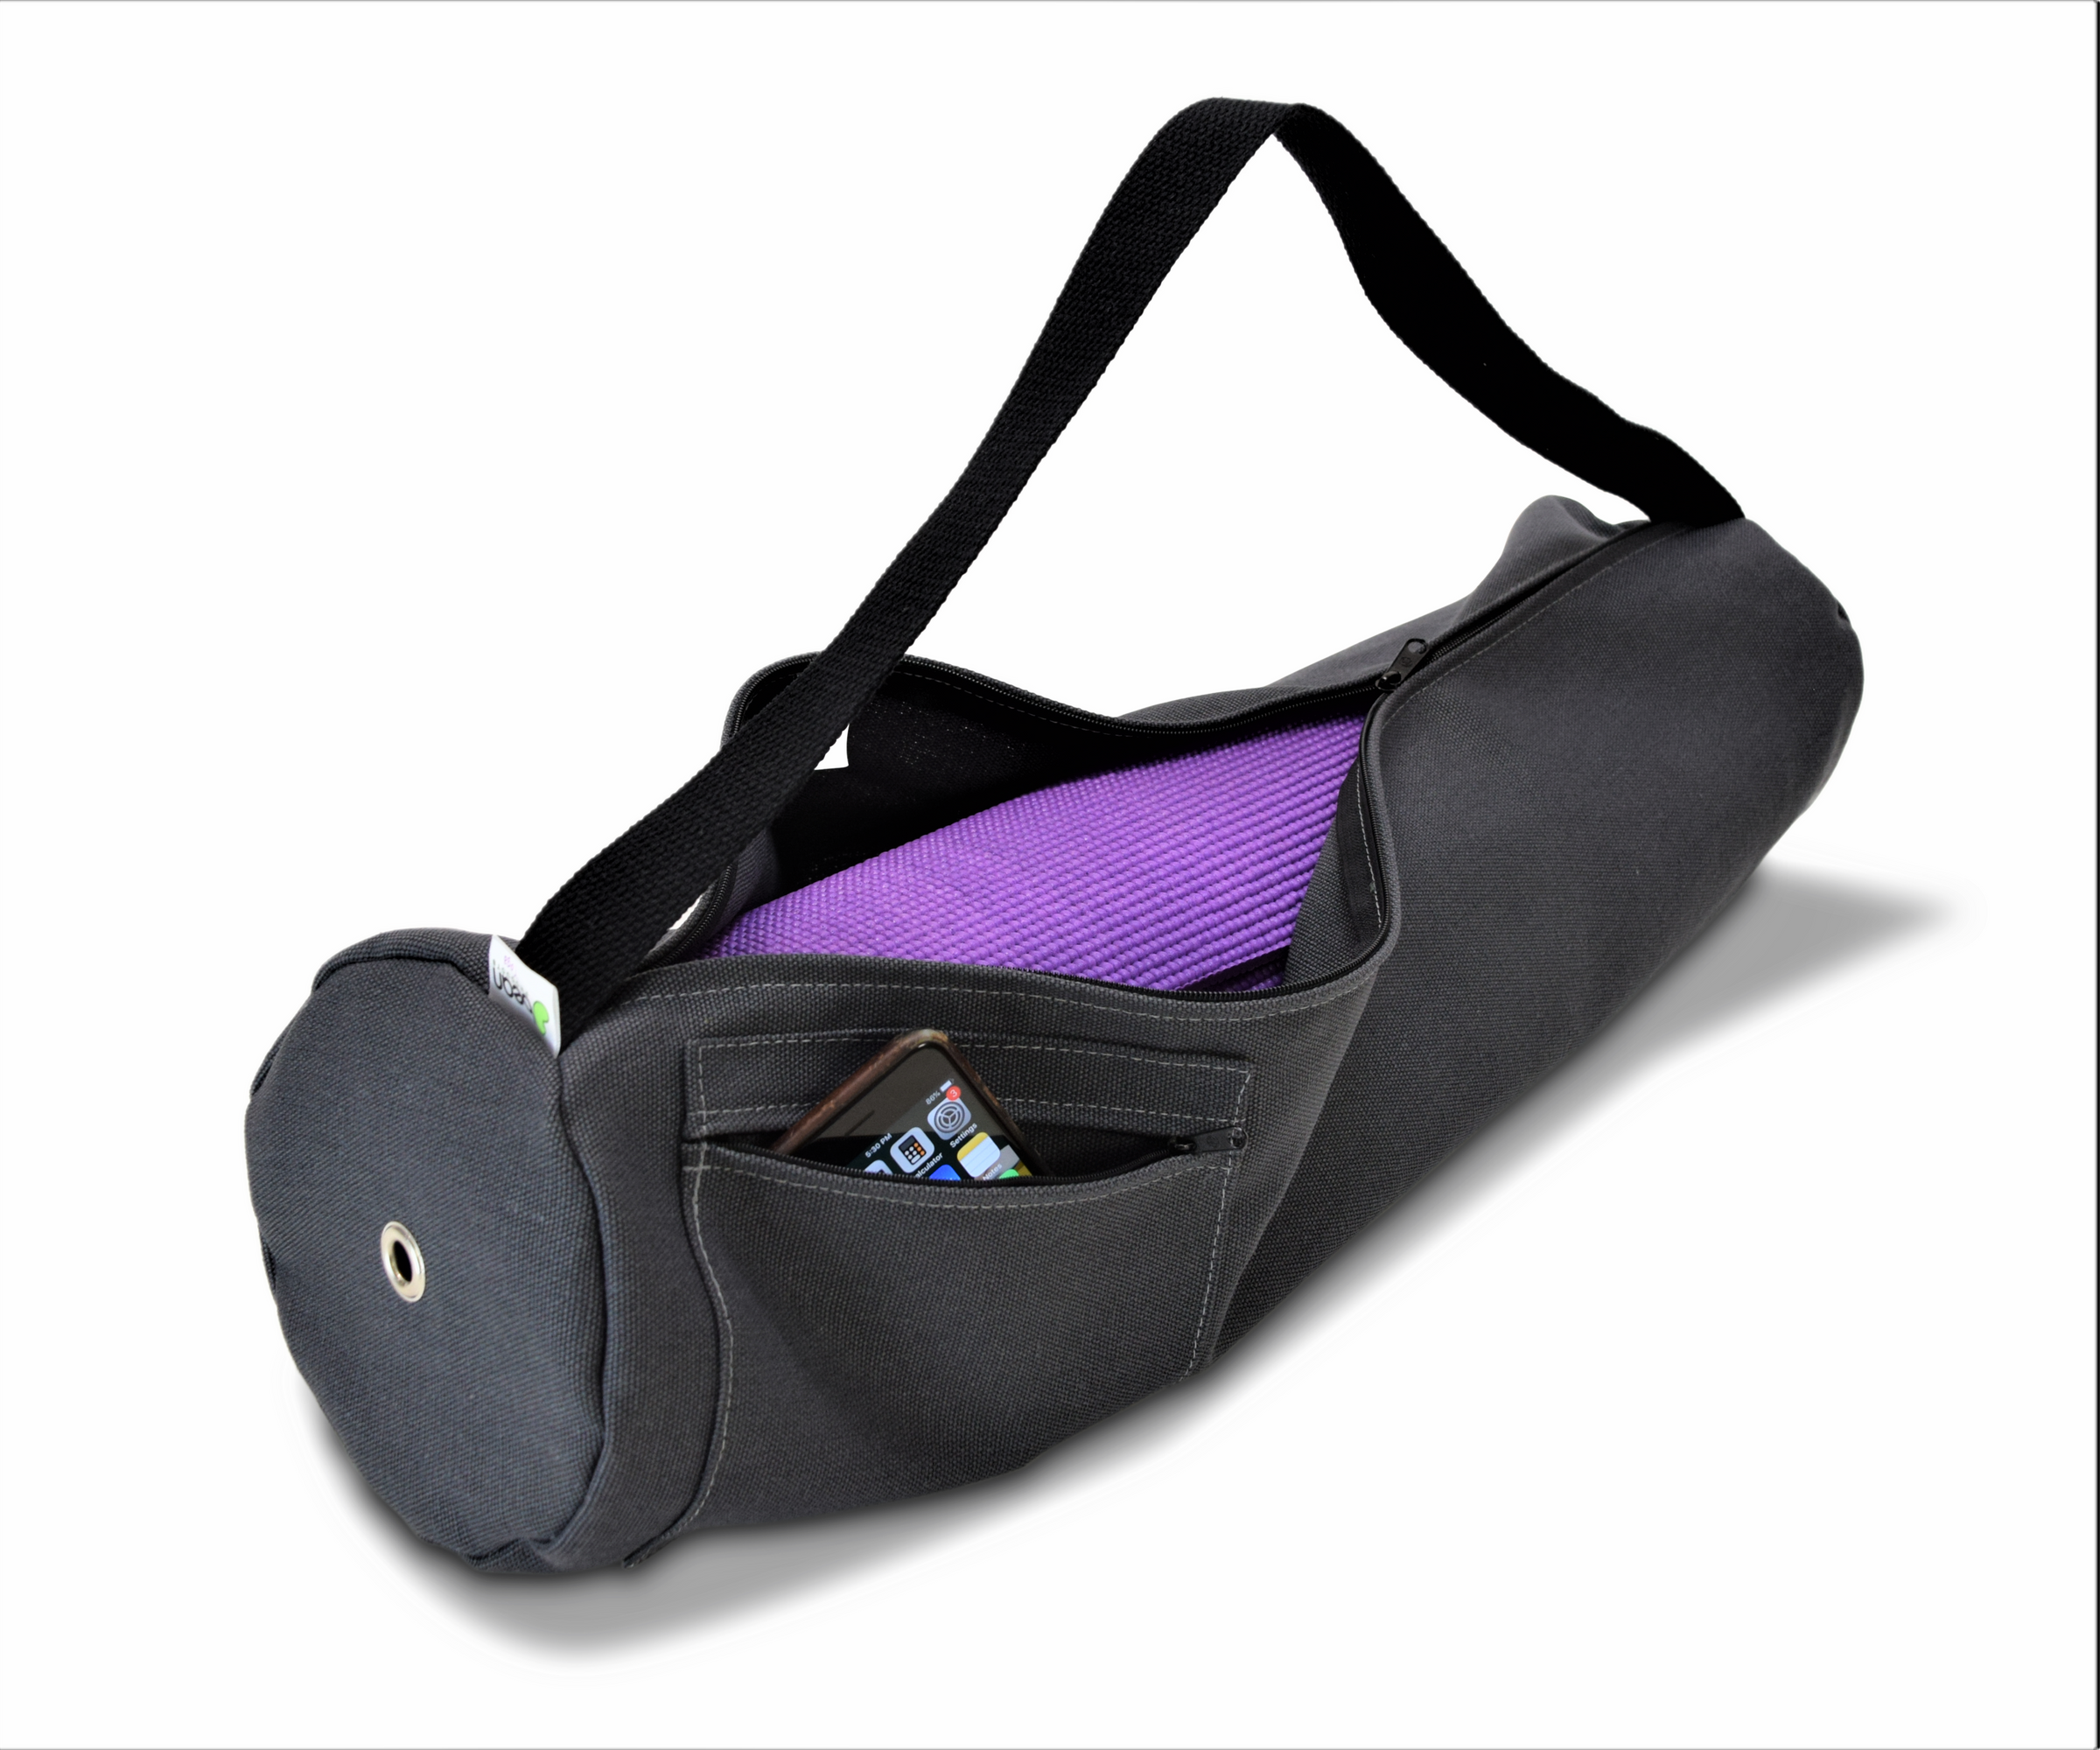 Factory Direct High Quality China Wholesale Yoga Mat Bag With Large Size  Open Pocket And Inside Zipper Pocket Yoga Mat Carrier Bag $5.4 from Texpro  Co., Ltd.